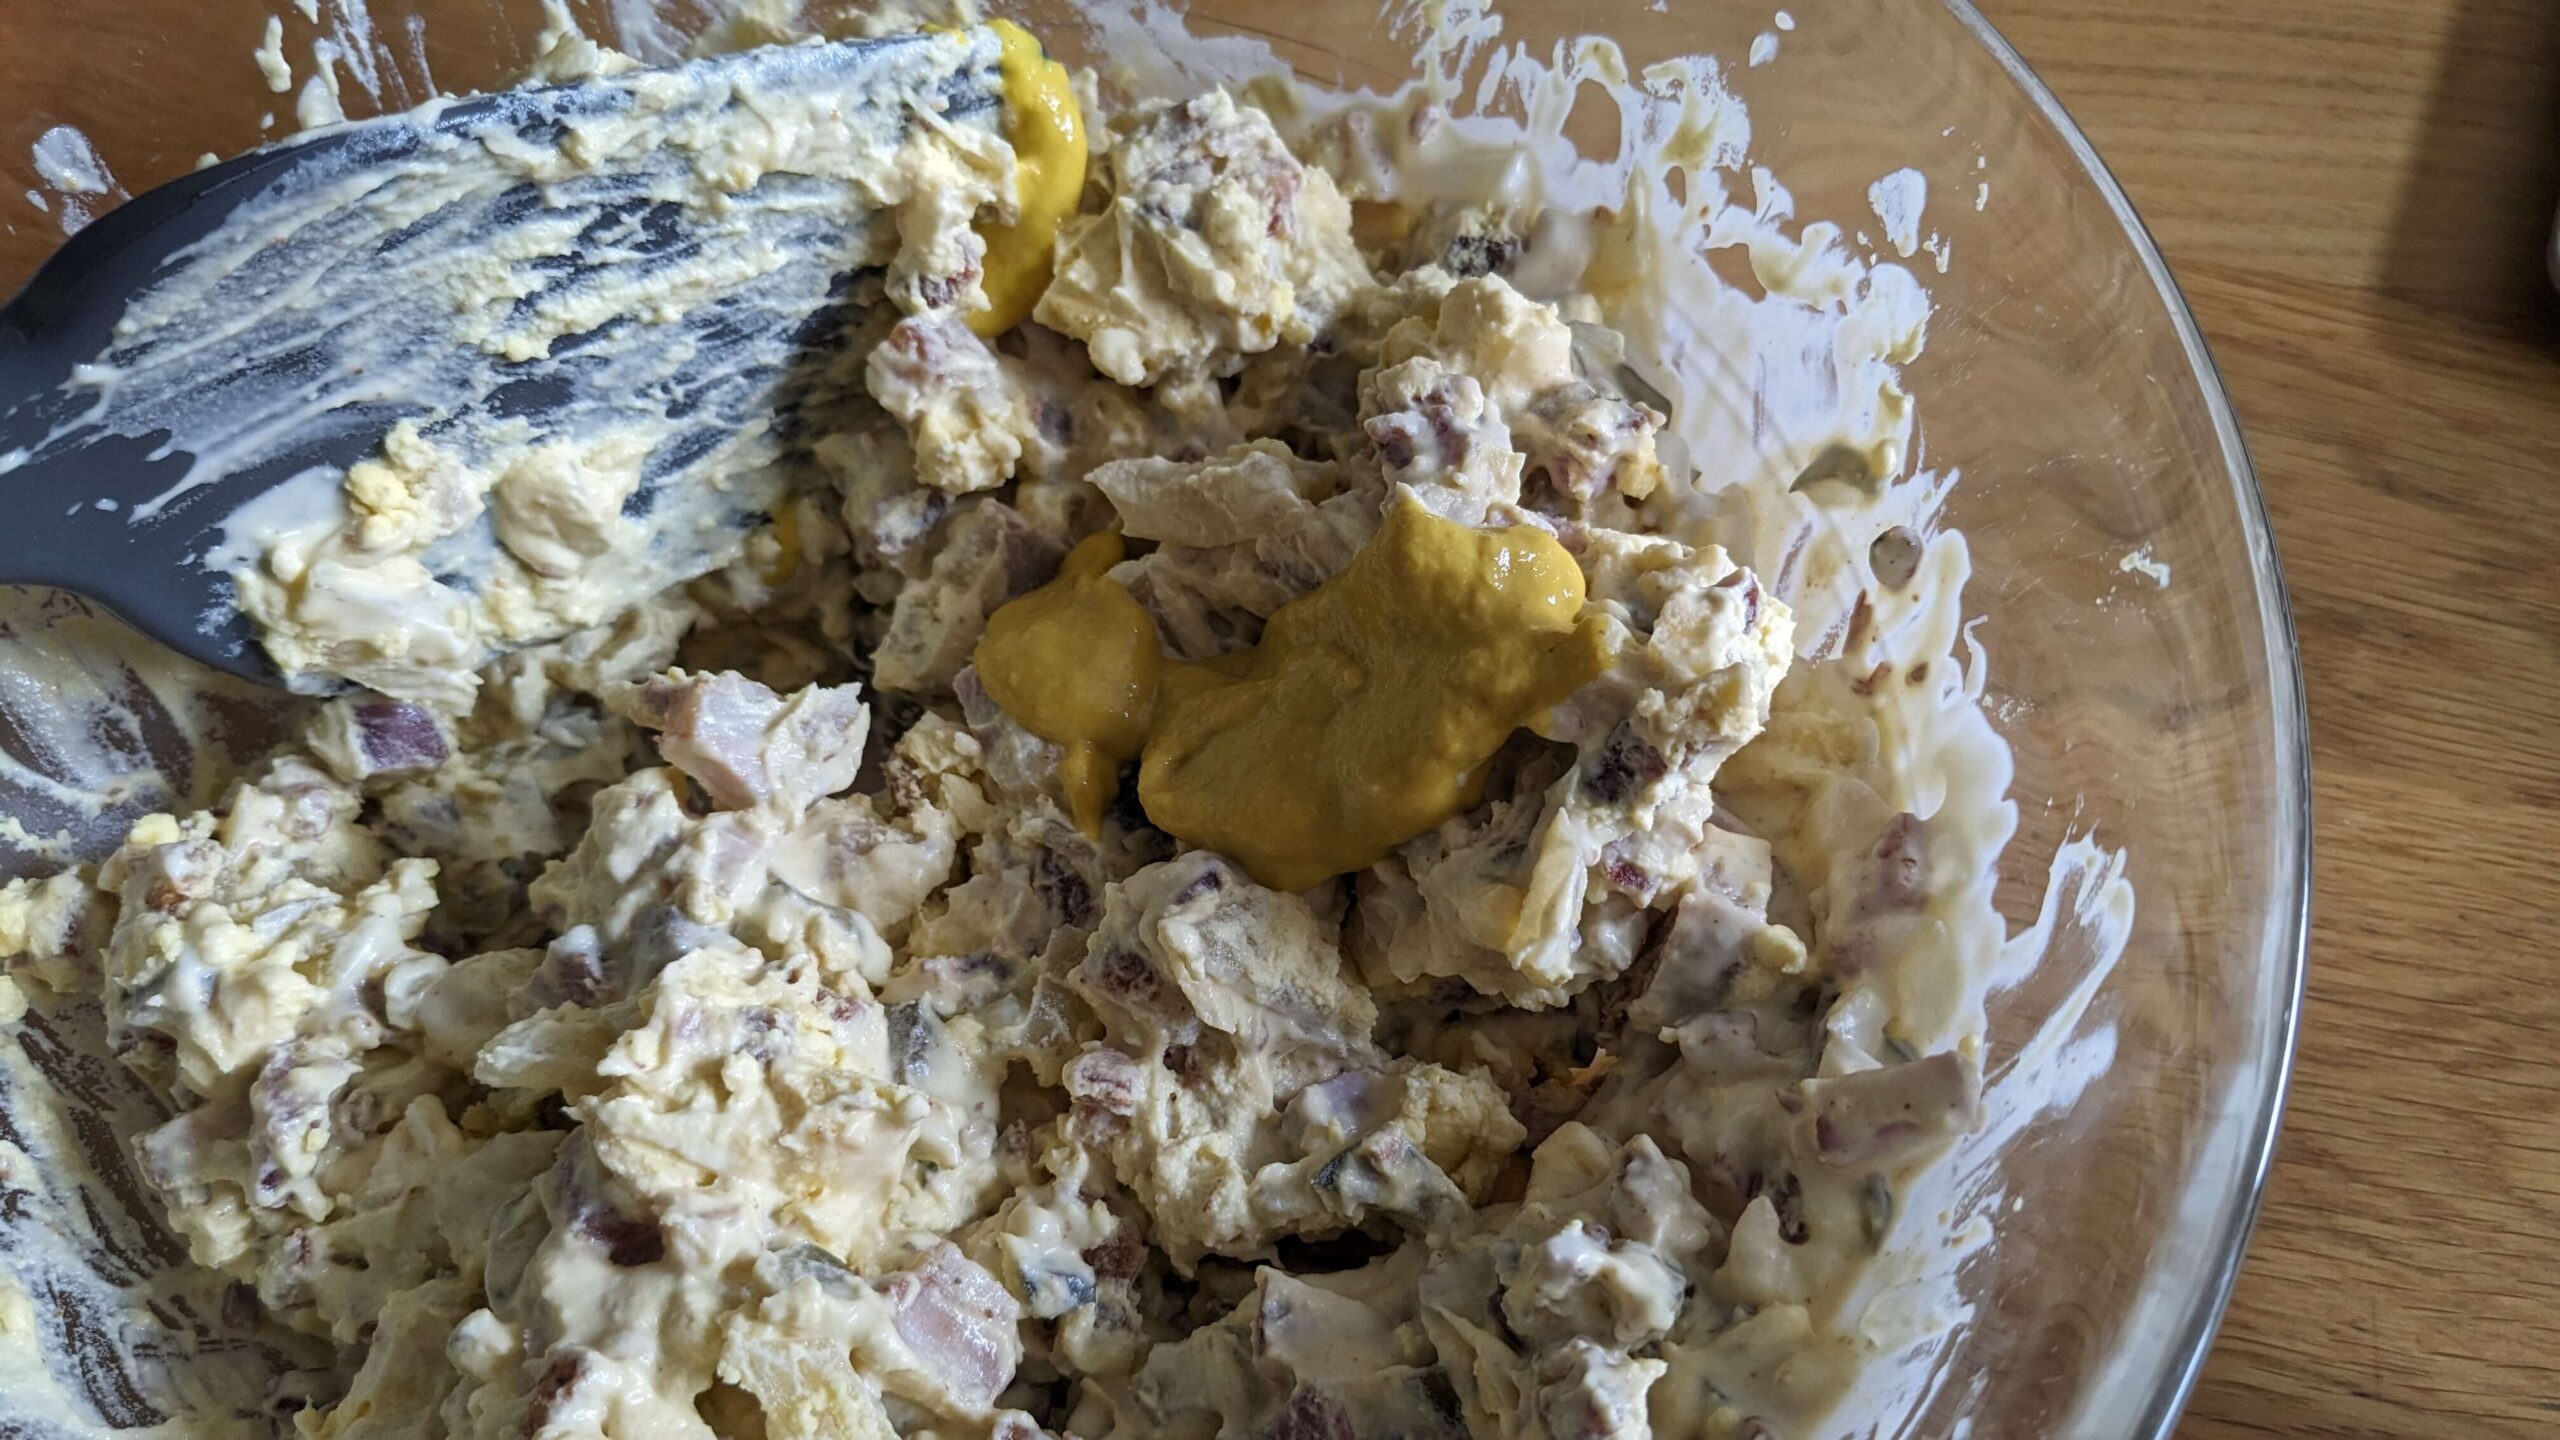 a glass bowl of deviled egg mixture and mustard